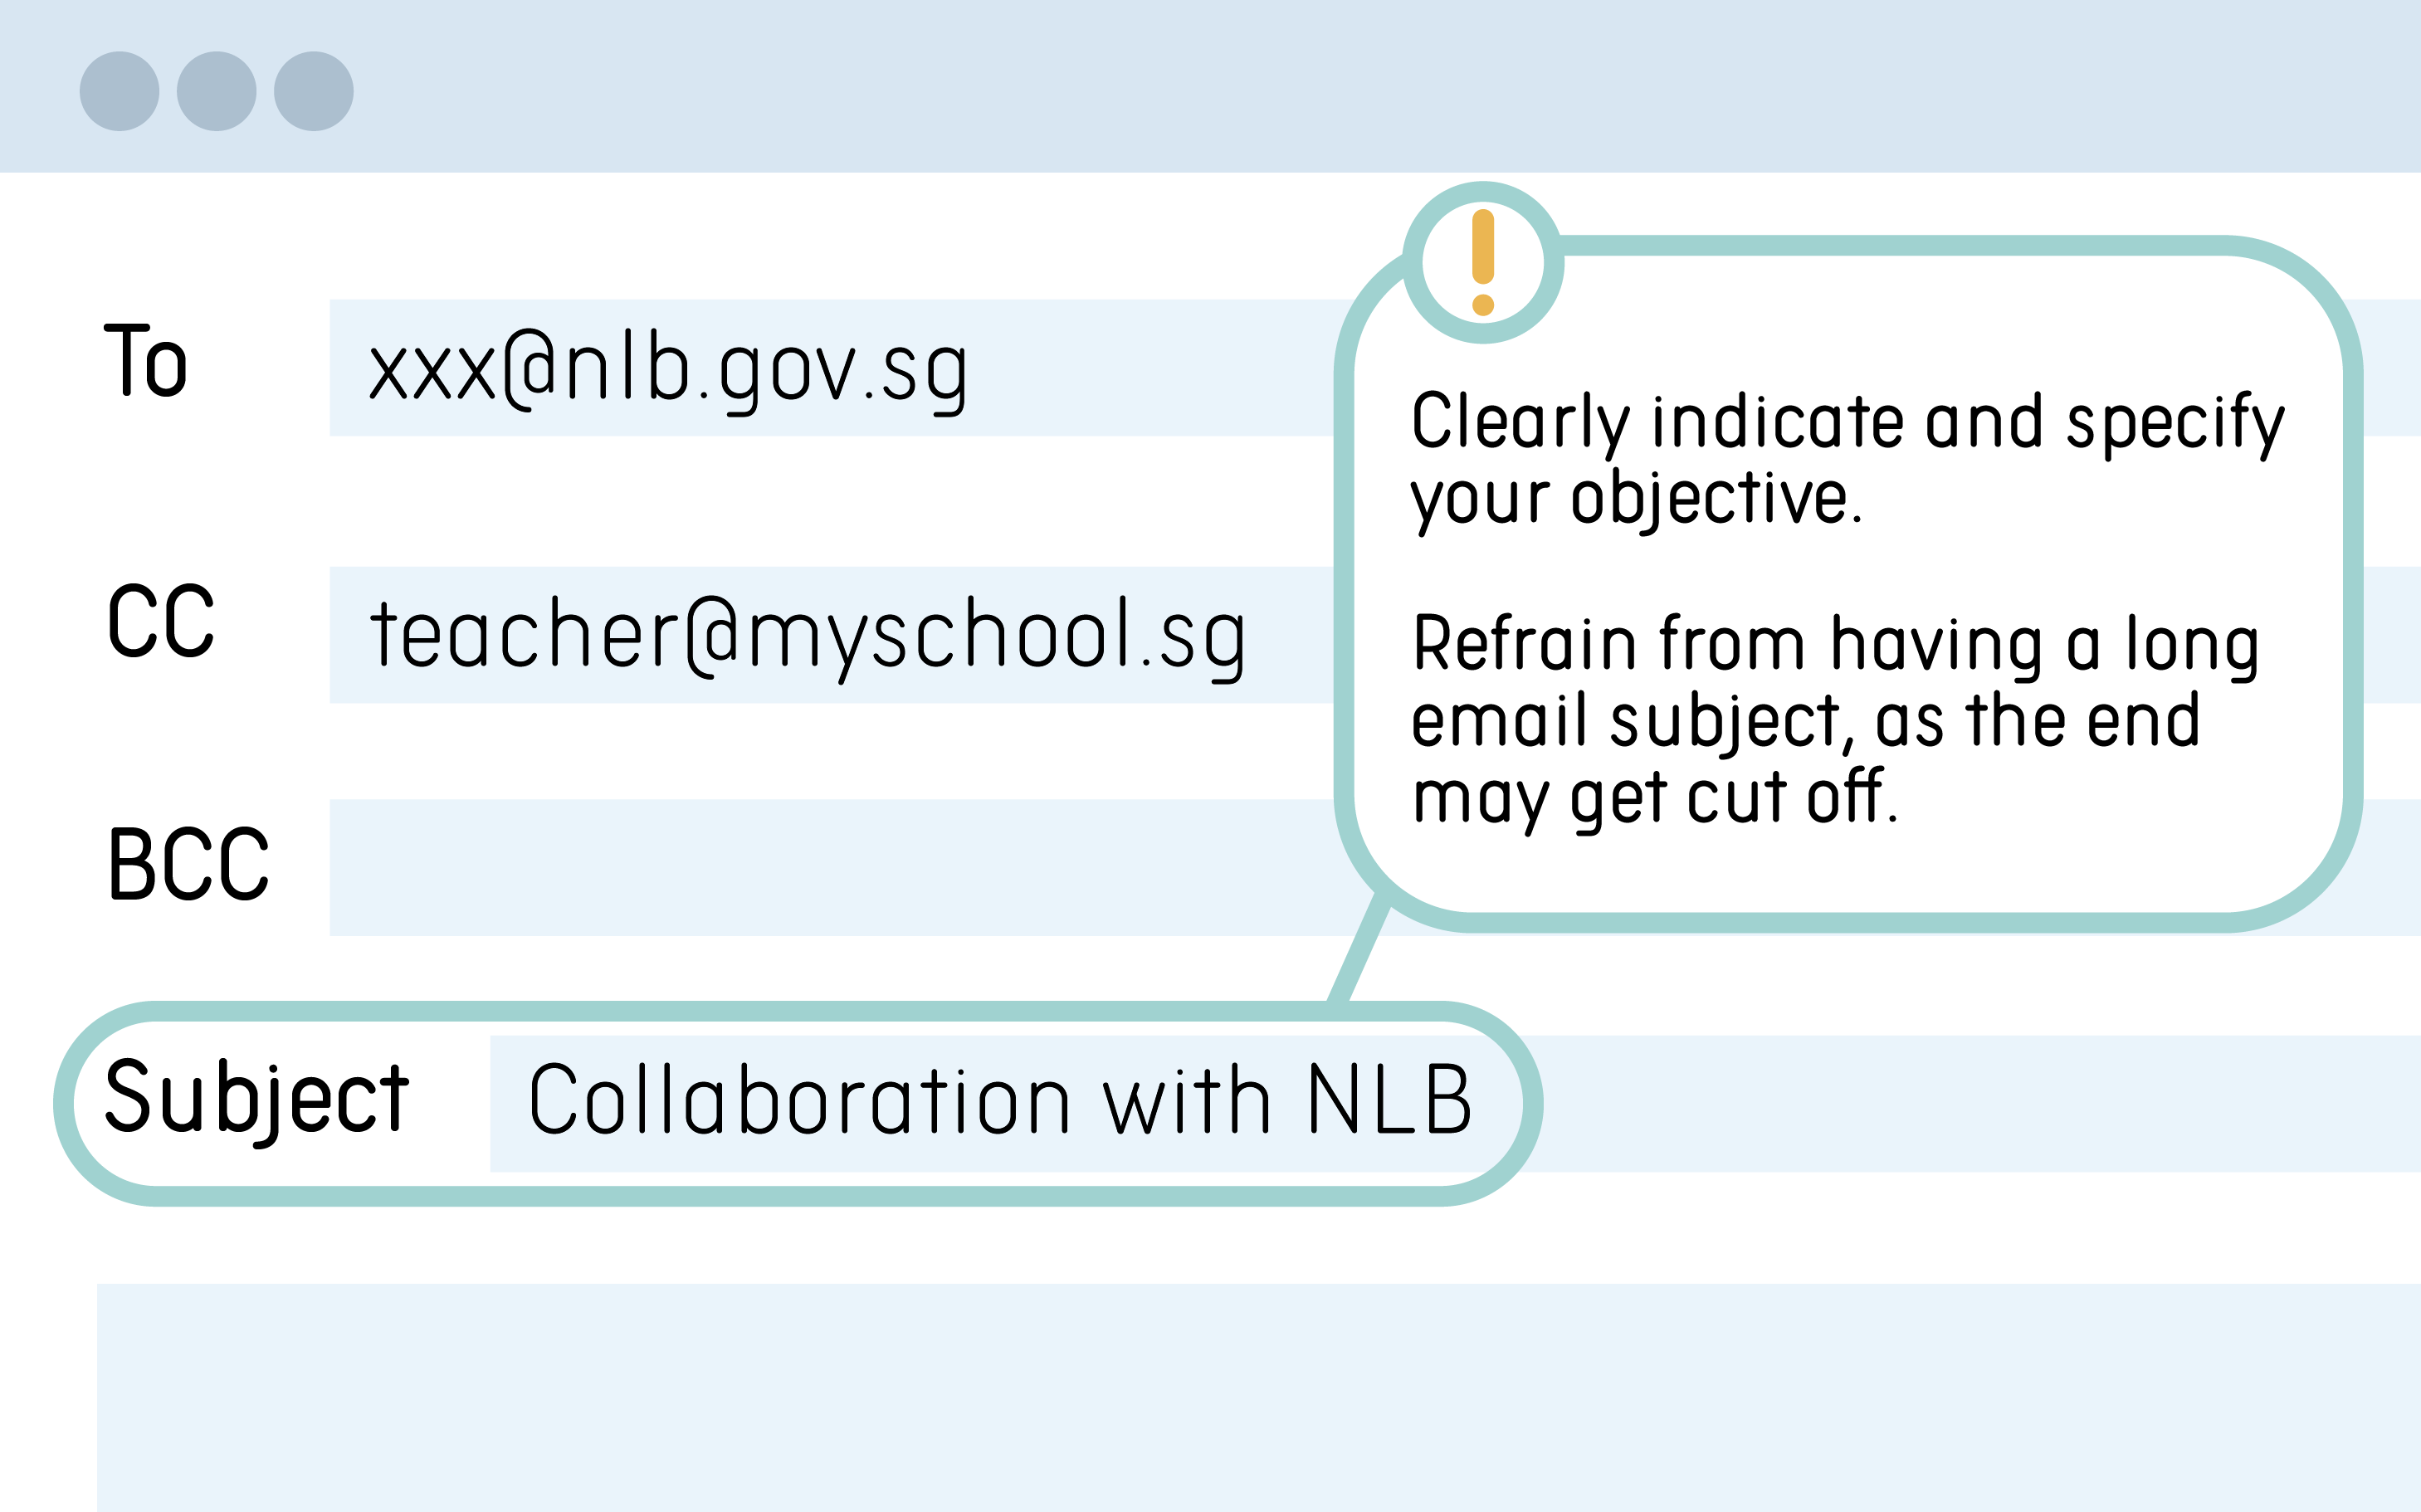 Tips: Clearly indicate and specify your objective. Refrain from having a long email subject, as the end may get cut off. Example: Collaboration with NLB.